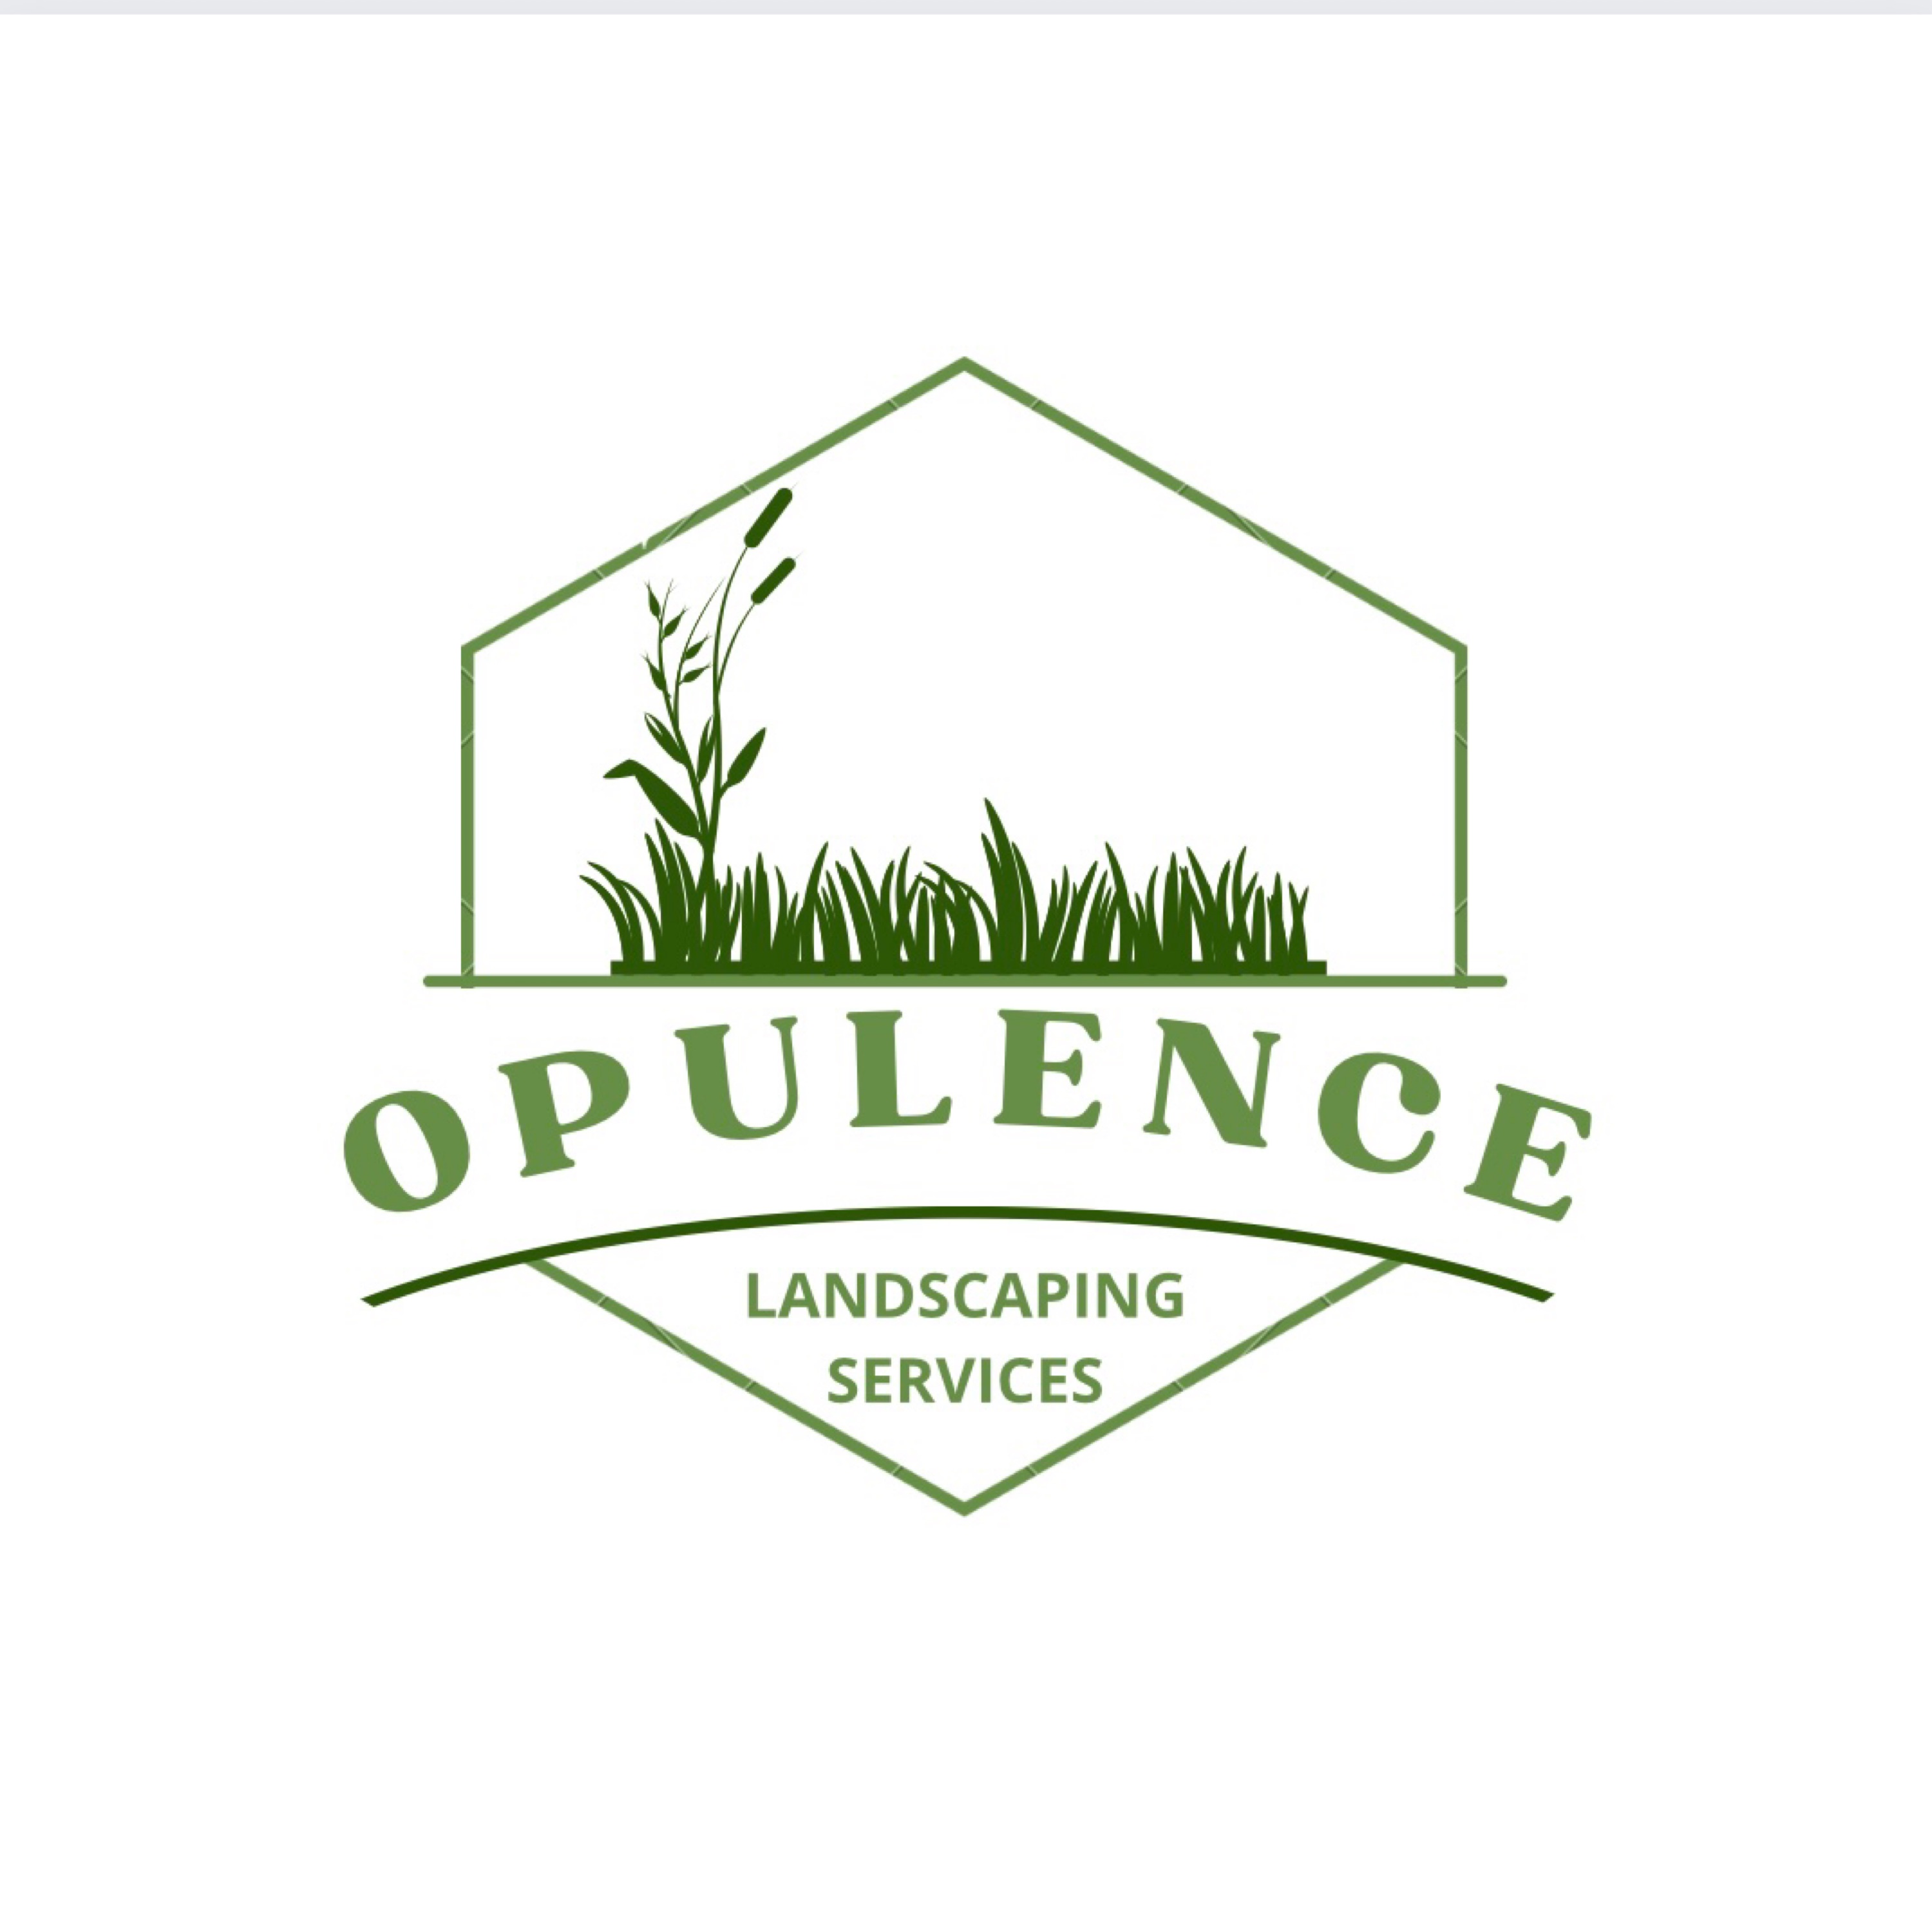 Opulence Landscaping Services Logo